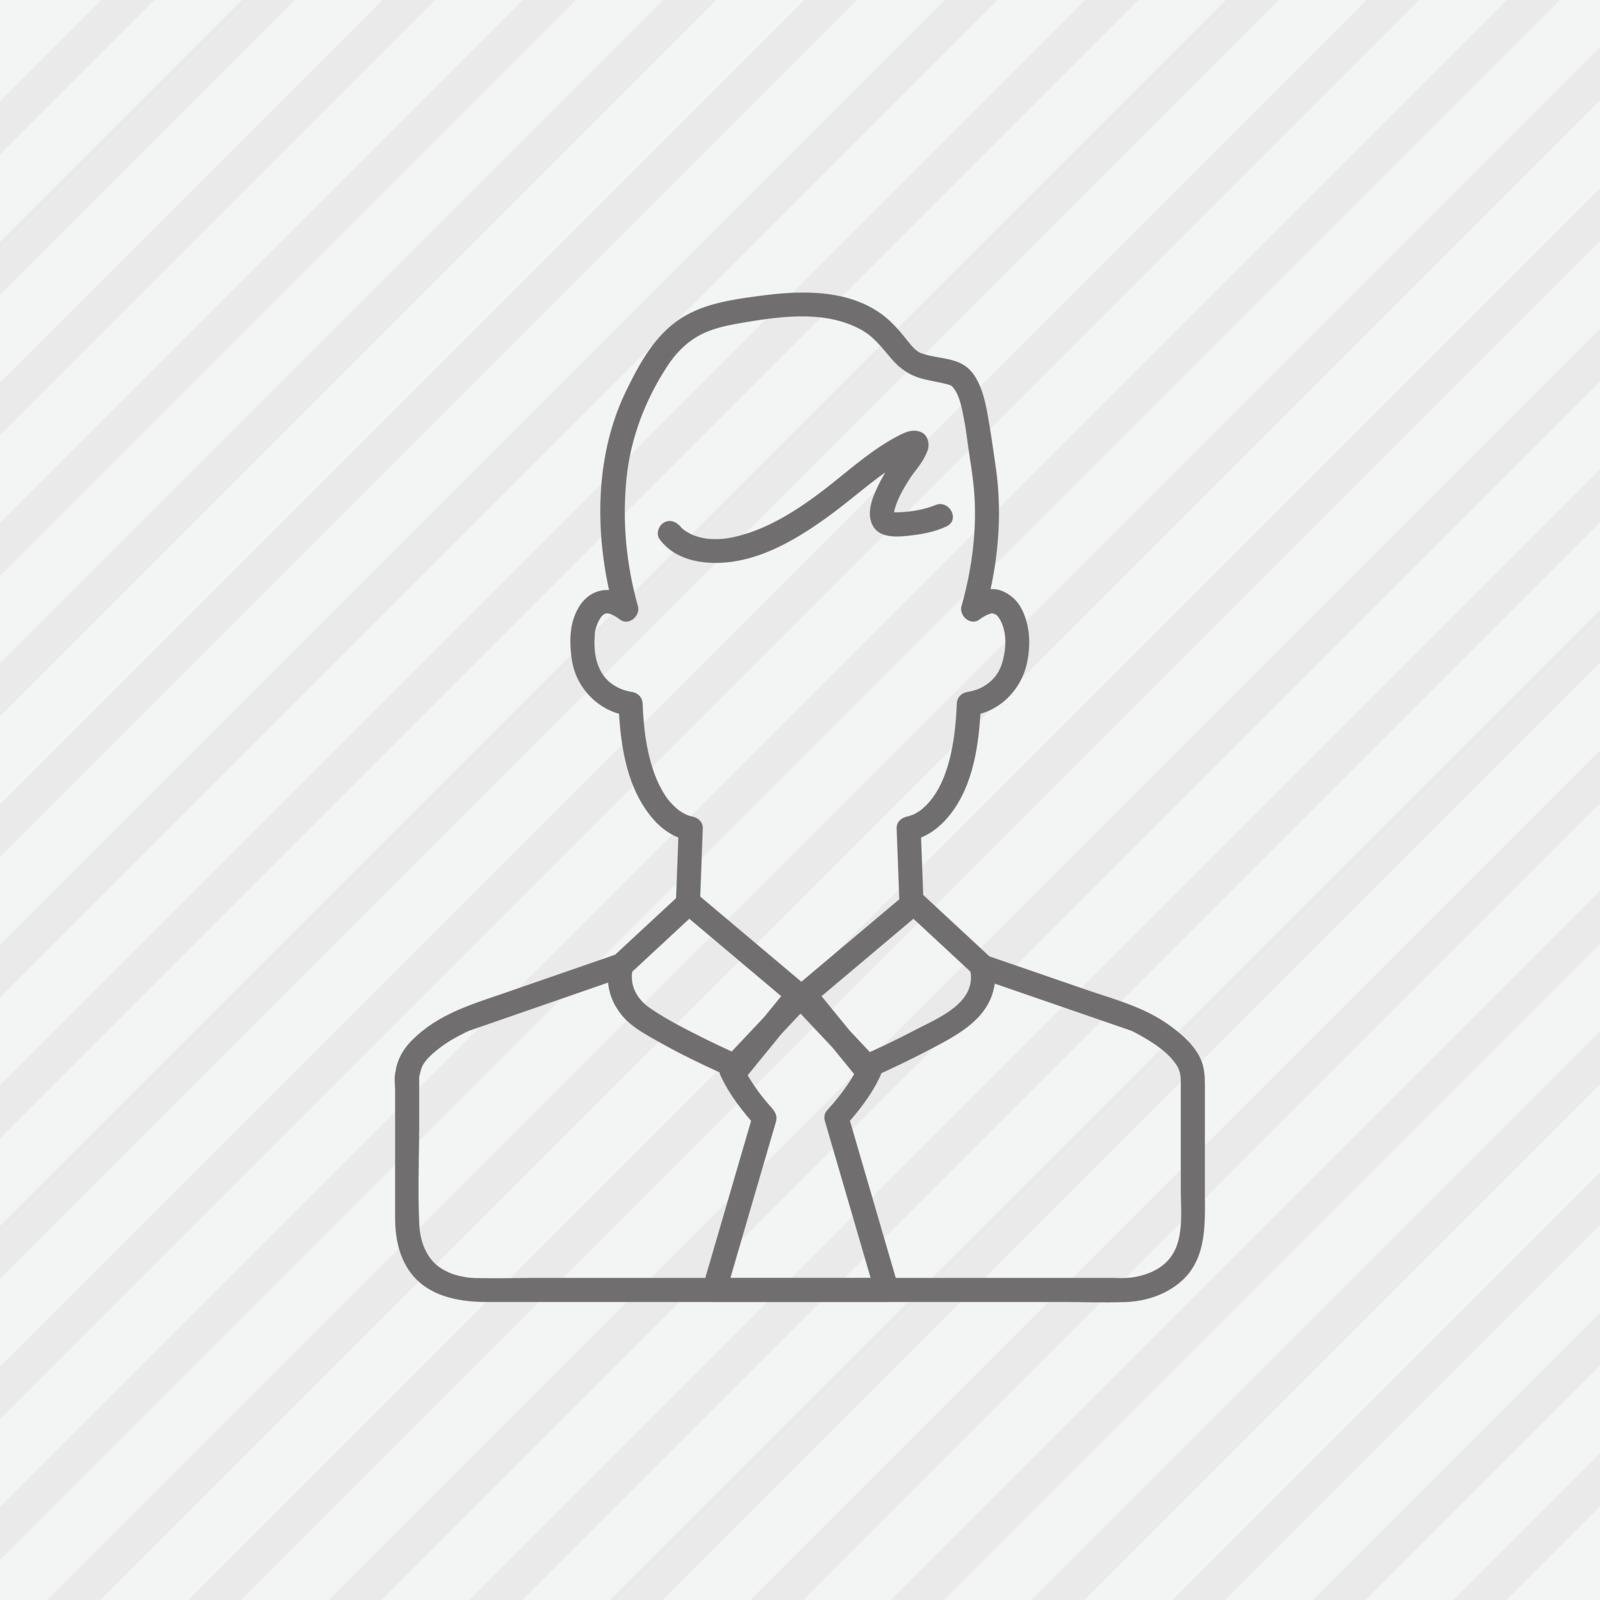 People line icon. Business man line vector illustration by glossygirl21